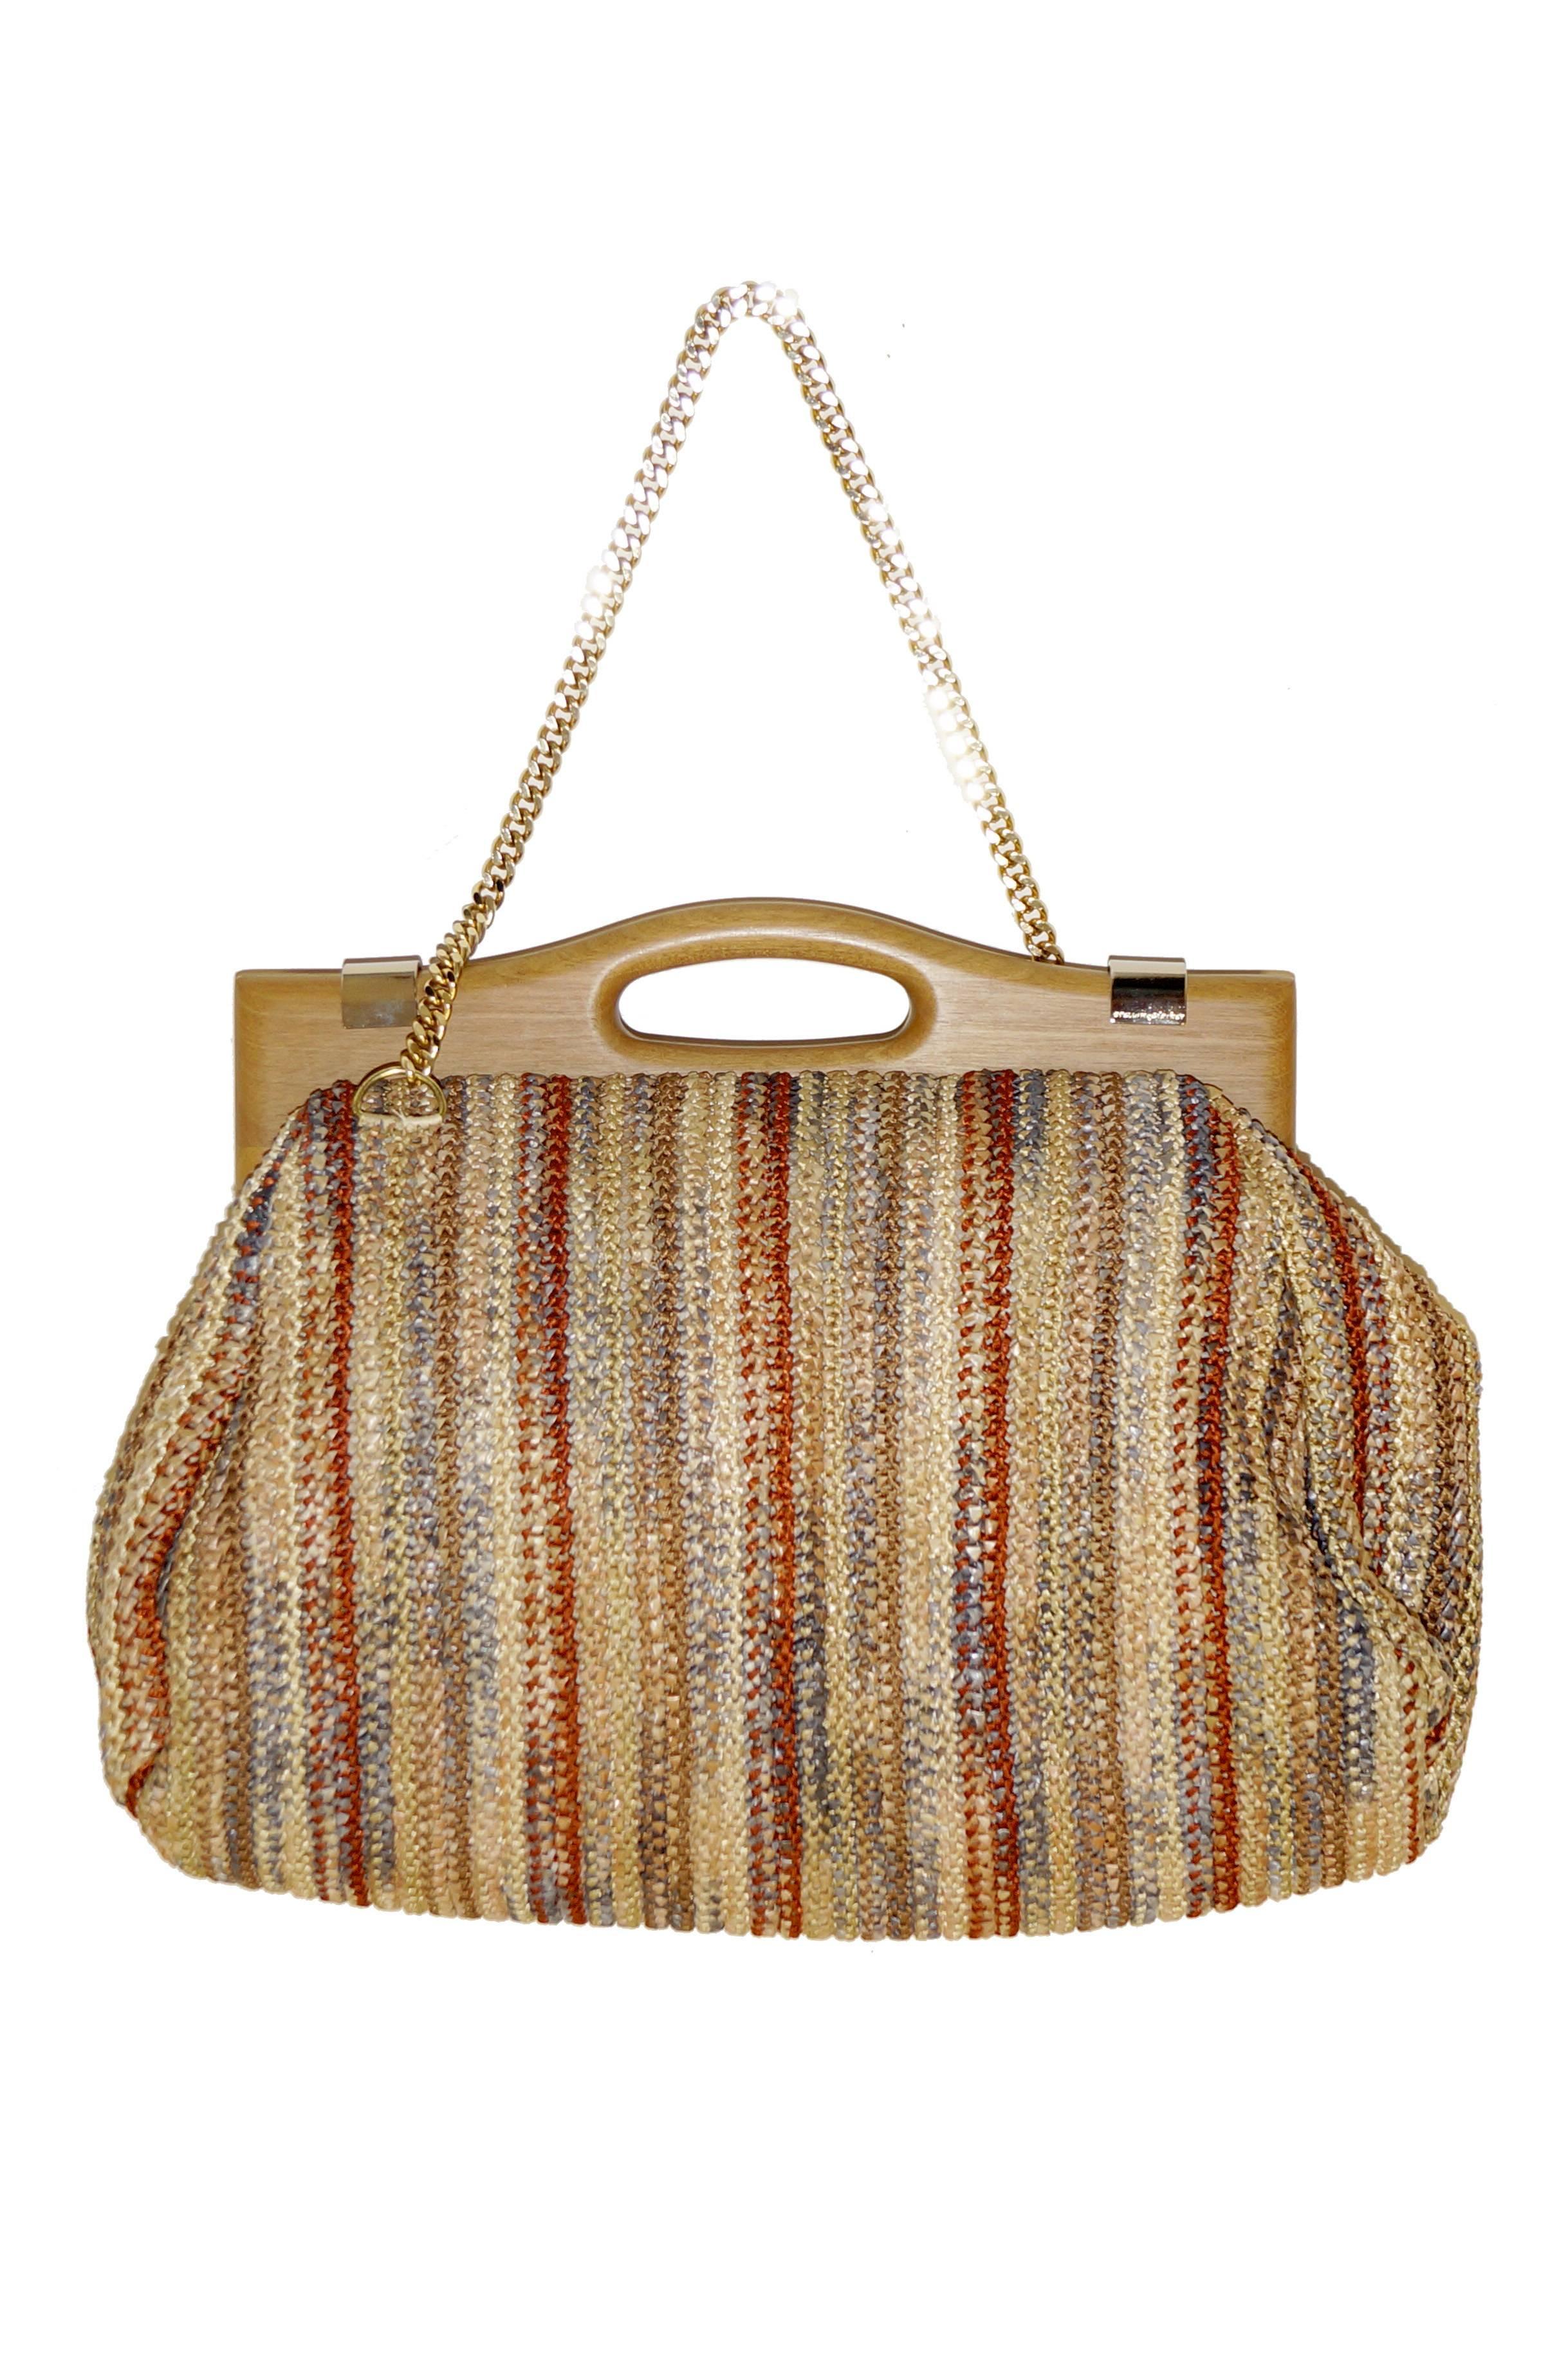 Early Stella McCartney ribbonwork handbag from late 2000s. This flexible bag has a beautiful exterior of colorful woven silk and synthetic raffia ribbons, with a wooden top handle and gold chain shoulder strap. The large interior pocket and